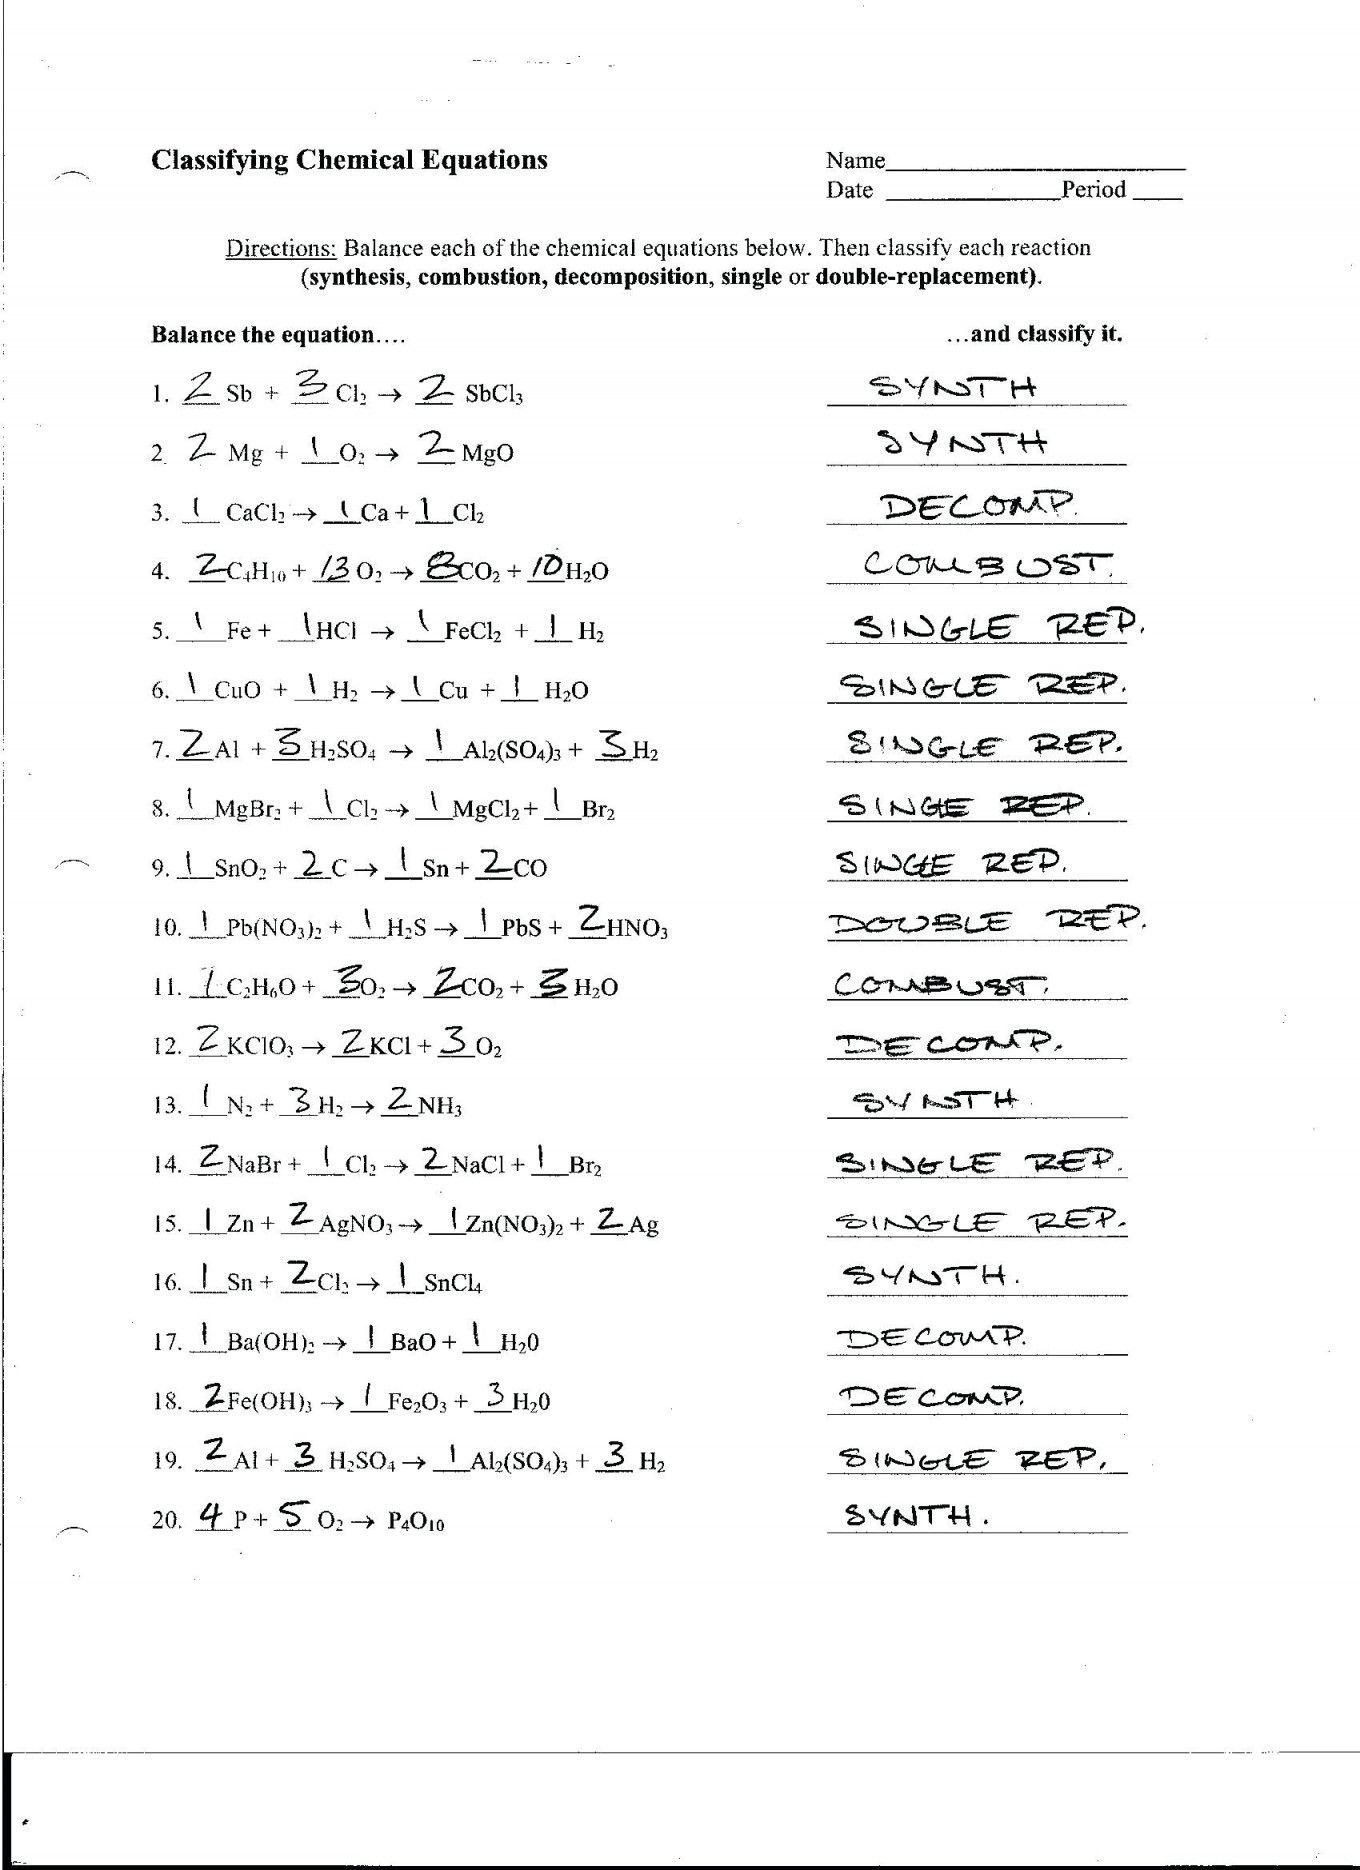 Nuclear Reactions Worksheet Answers Balancing Nuclear Fission Equations Worksheet Answers